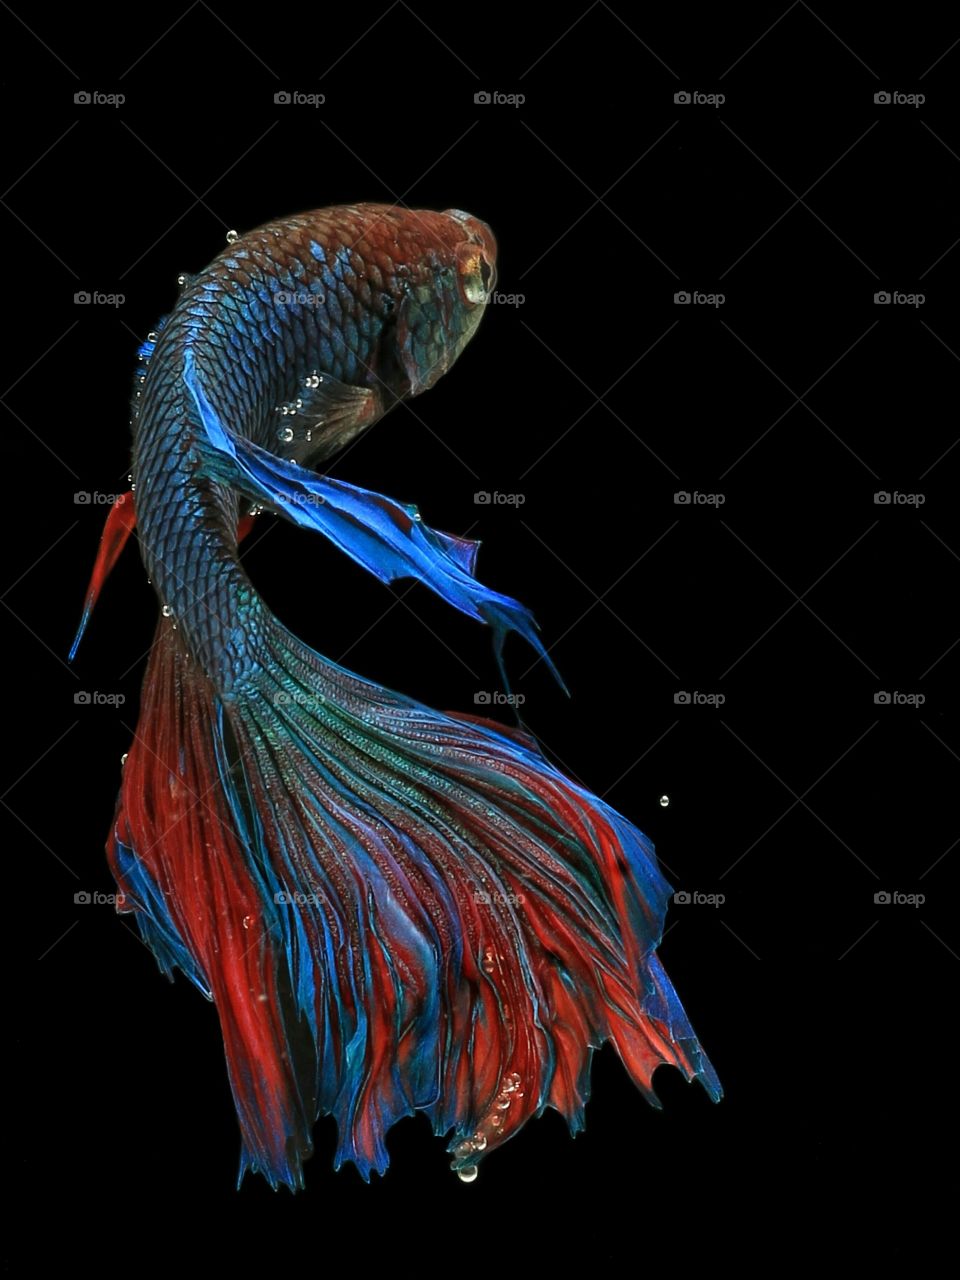 BACK POSE
HALFMOON BETTA FISH
WITH BLACK OR DARK BACKGROUND THE COLOUR IS ALL OUT